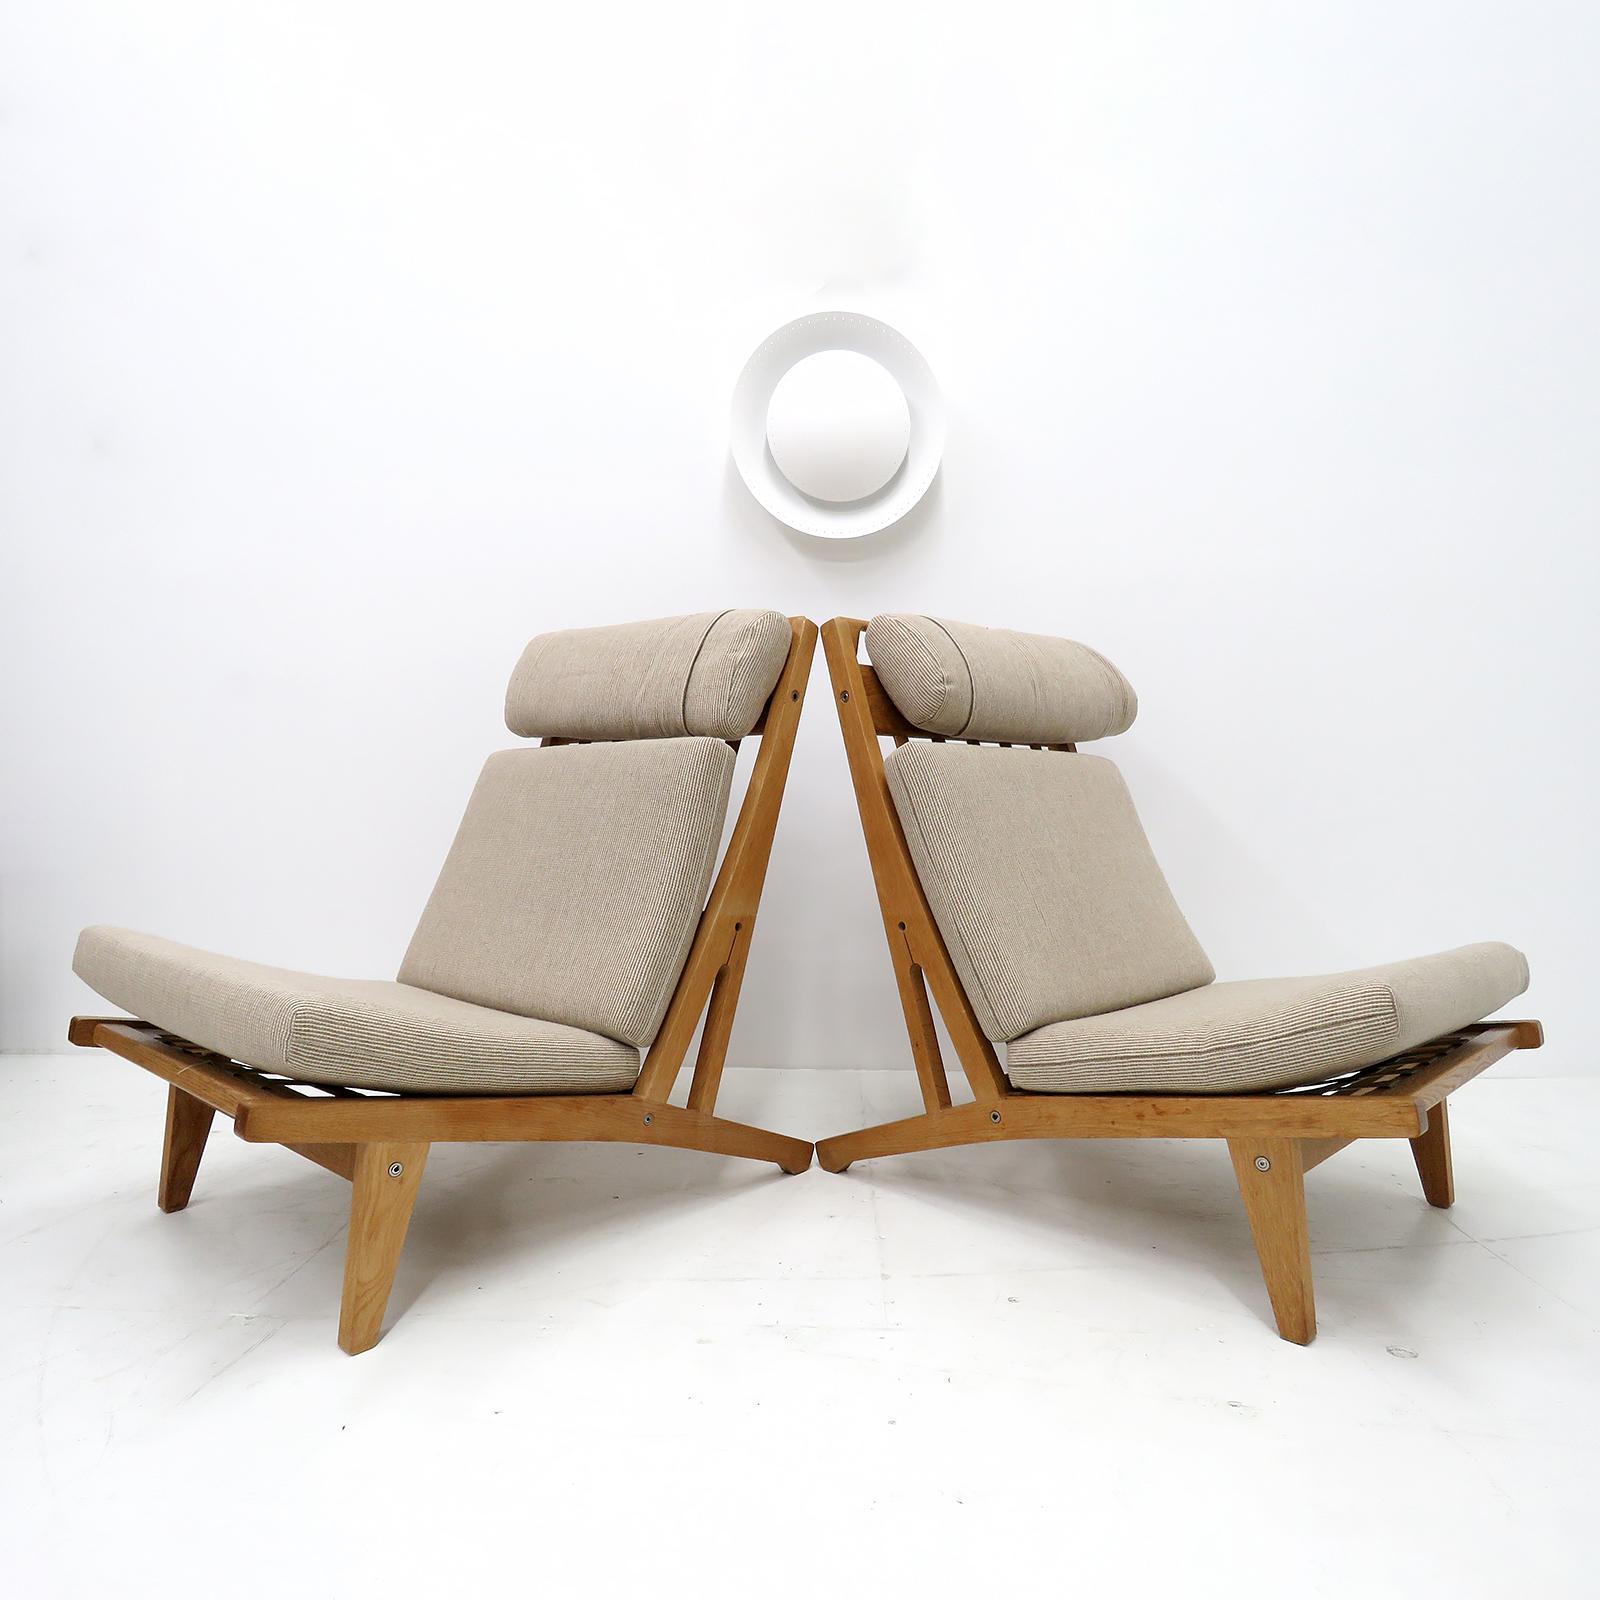 Large scale high back chair by Hans Wegner with solid oak frame and cushions in beige wool (seemingly reupholstered at a later date), produced by GETAMA in 1969, model GE 375, detachable neck cushion, original makers mark to underside. Priced